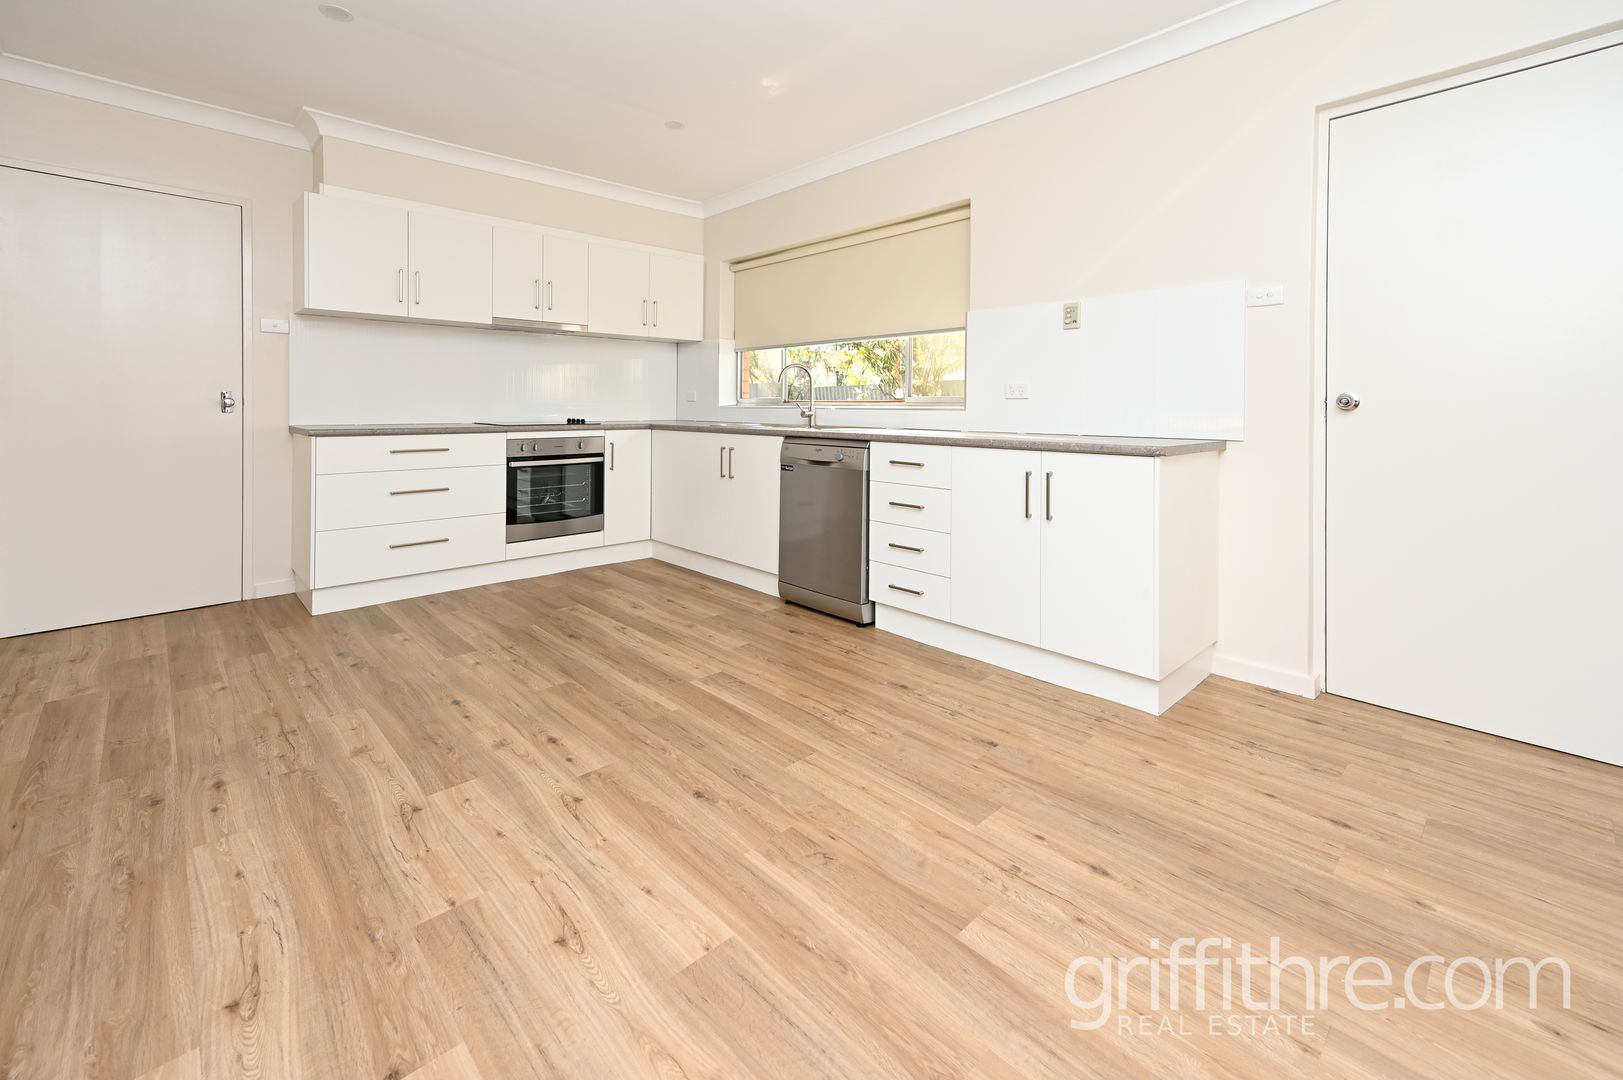 131 Macarthur St, Griffith NSW 2680, Image 1